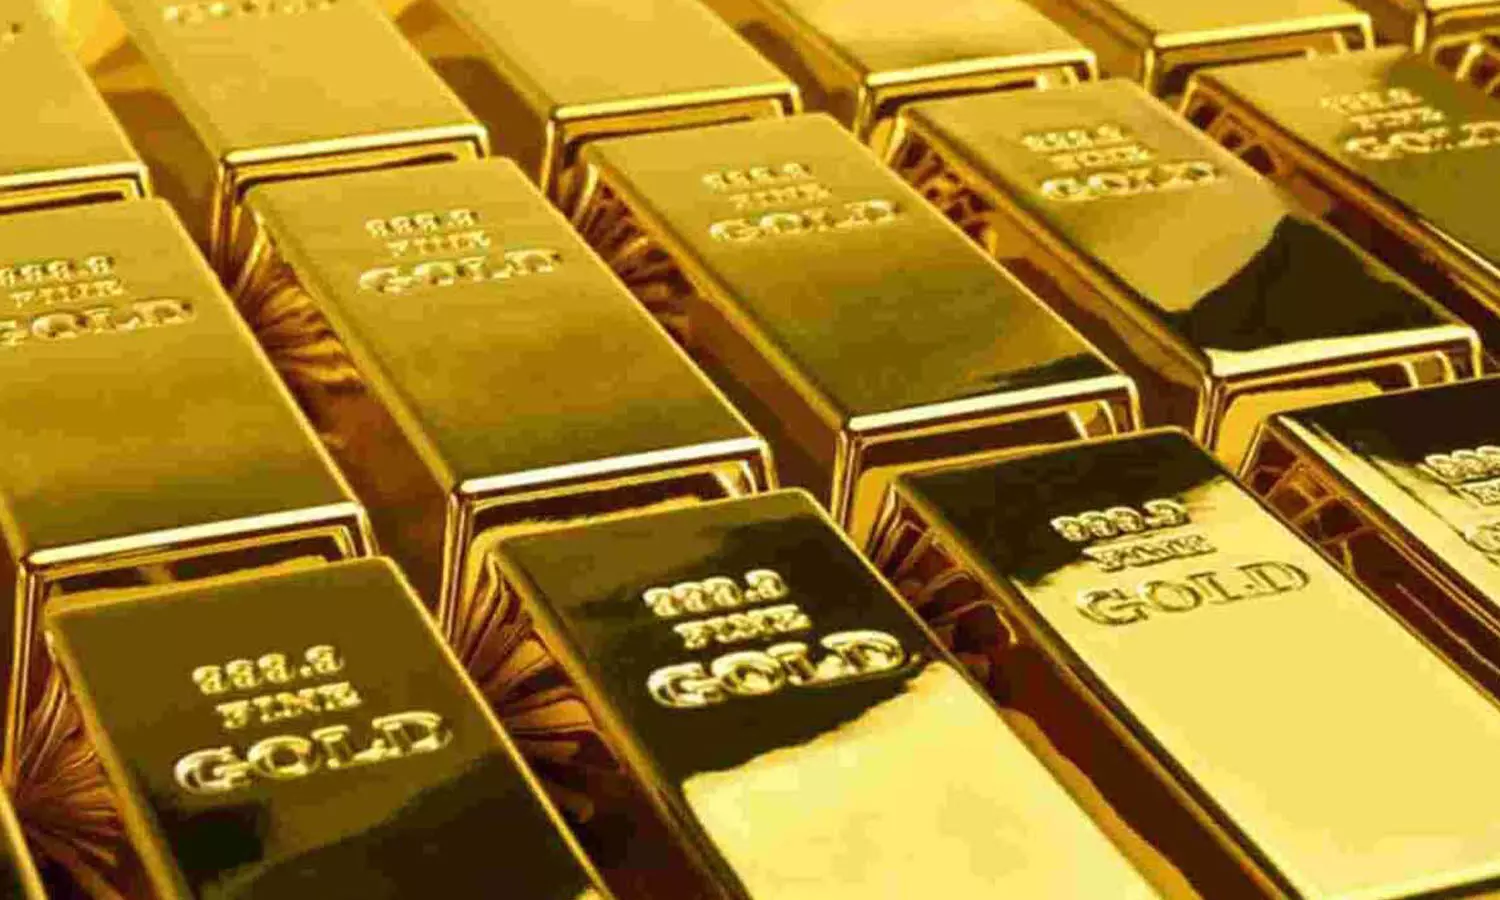 Goldsmith flees with gold worth Rs. 83 lakh from jwellery shop in Narayanaguda